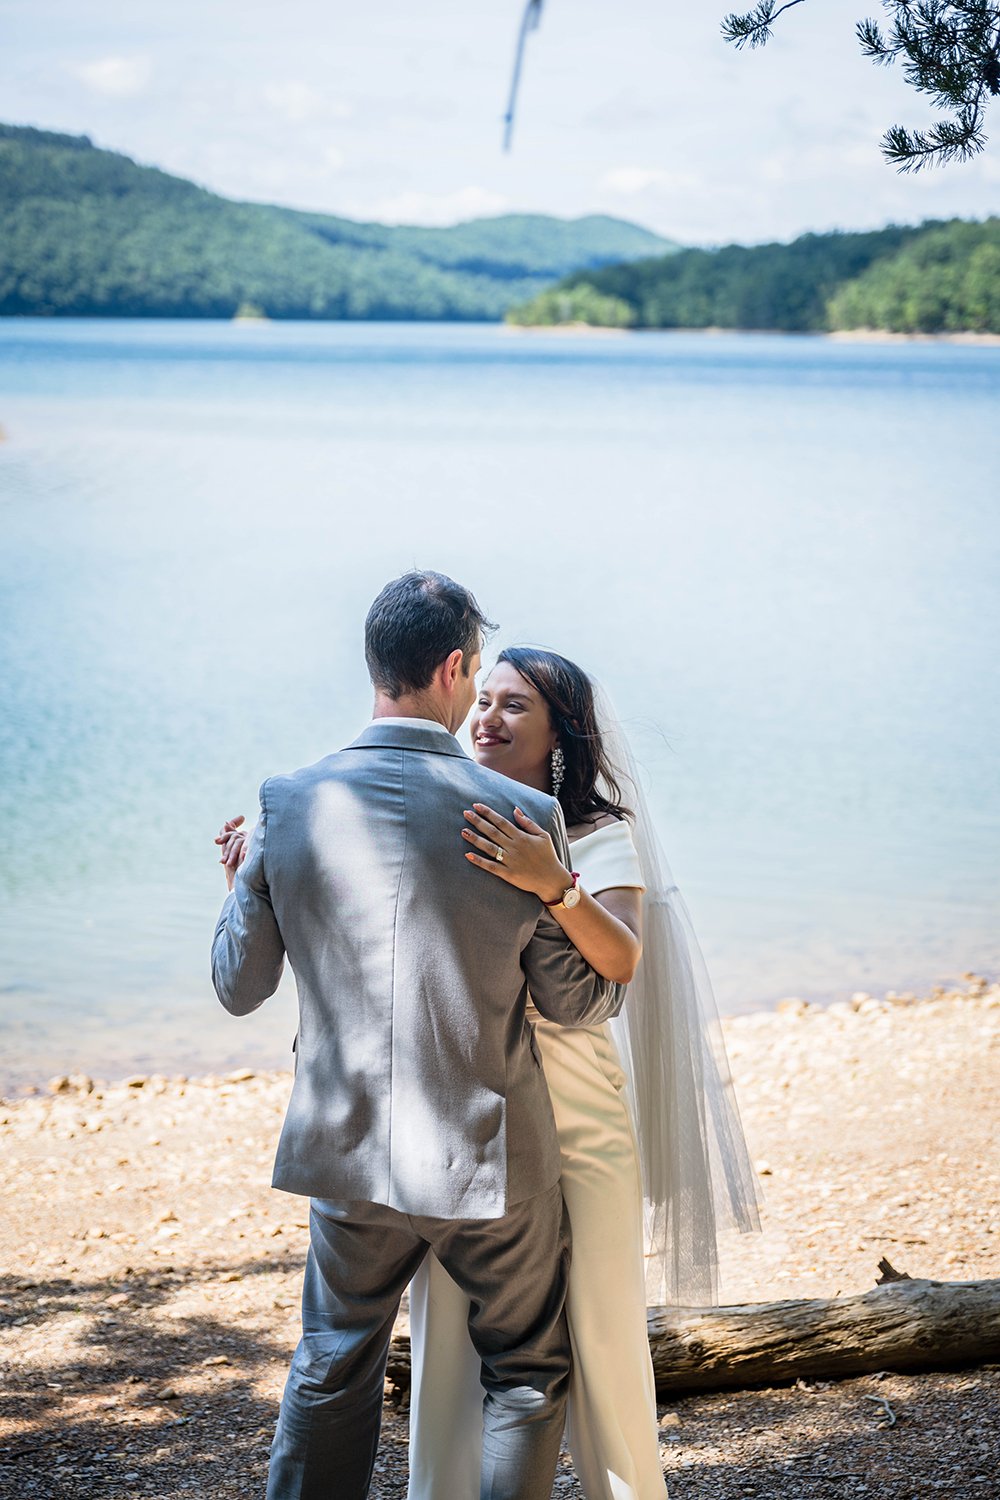 A newlywed couple take their first dance on the coast of Carvin's Cove with a blue lake and the Blue Ridge Mountains as their backdrop on their elopement day.